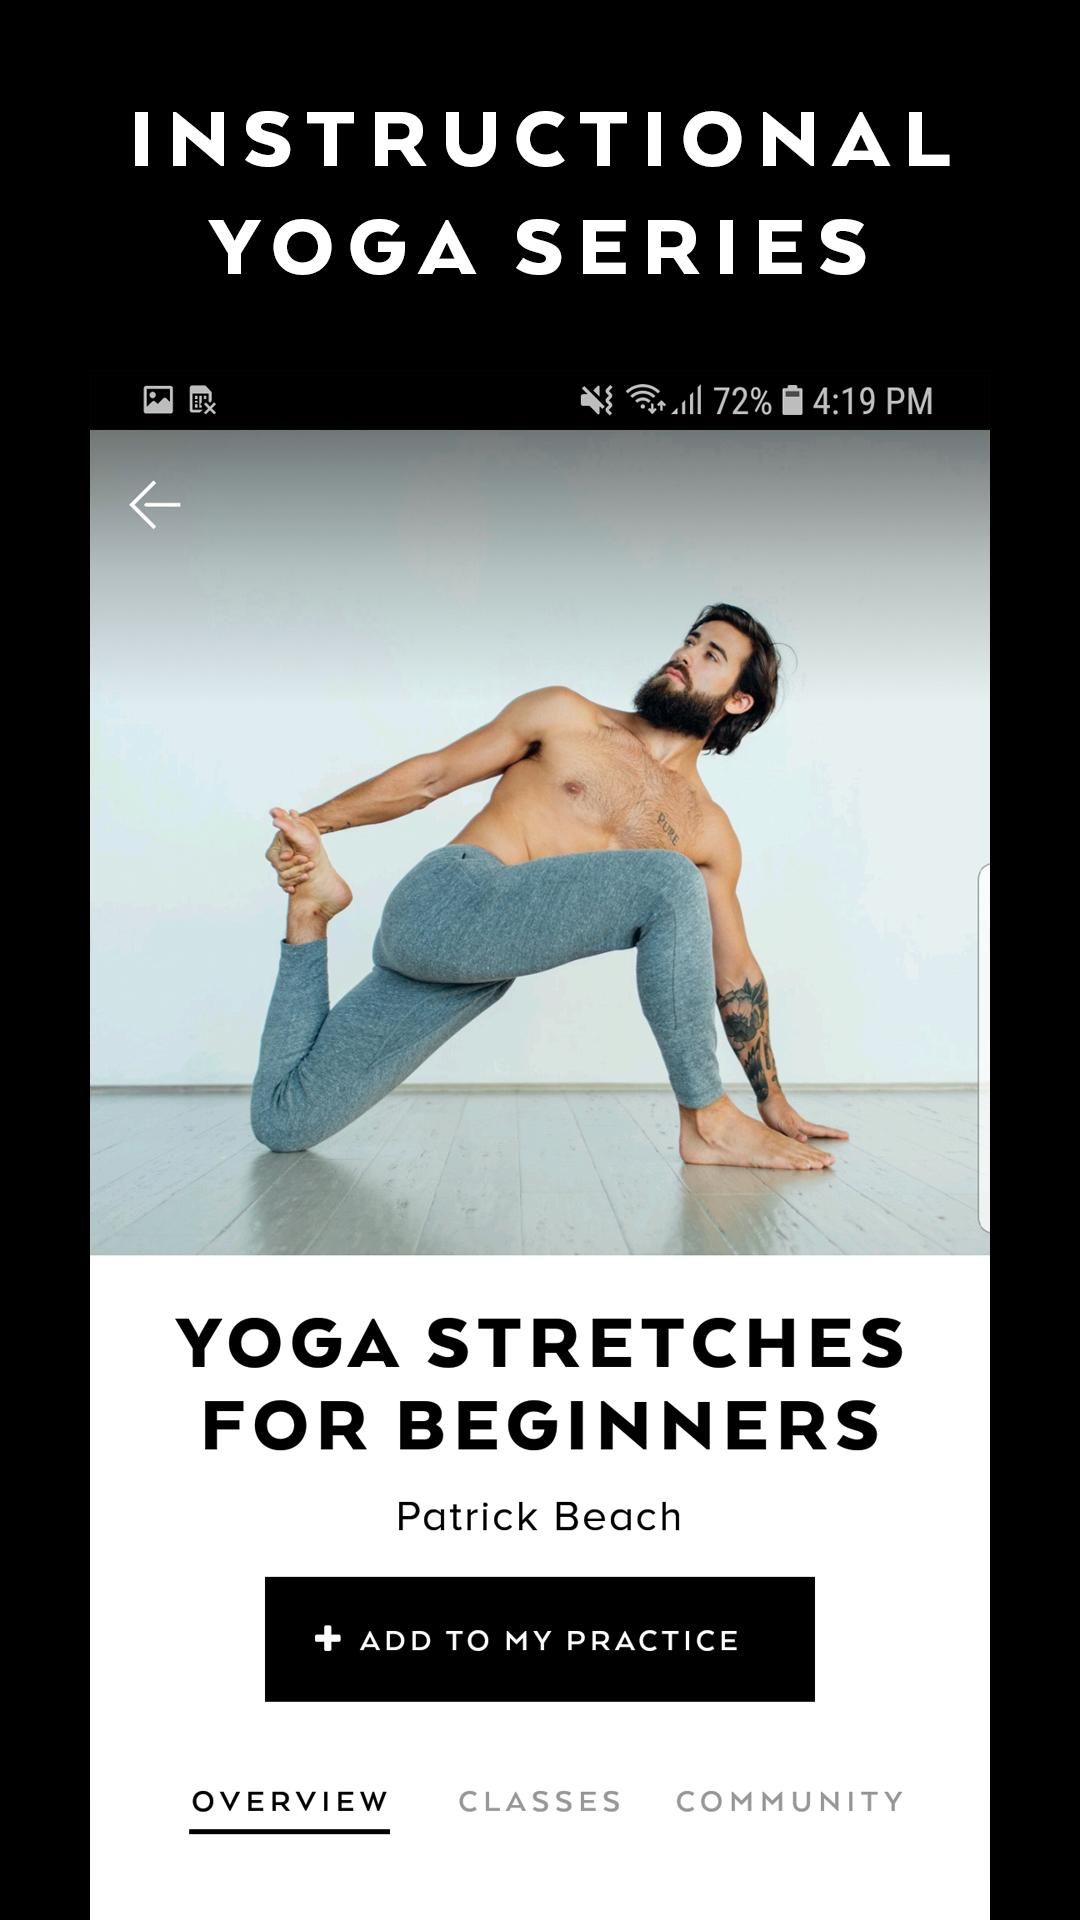 50 Must-know BEGINNER YOGA POSES | Yoga for beginners - YouTube